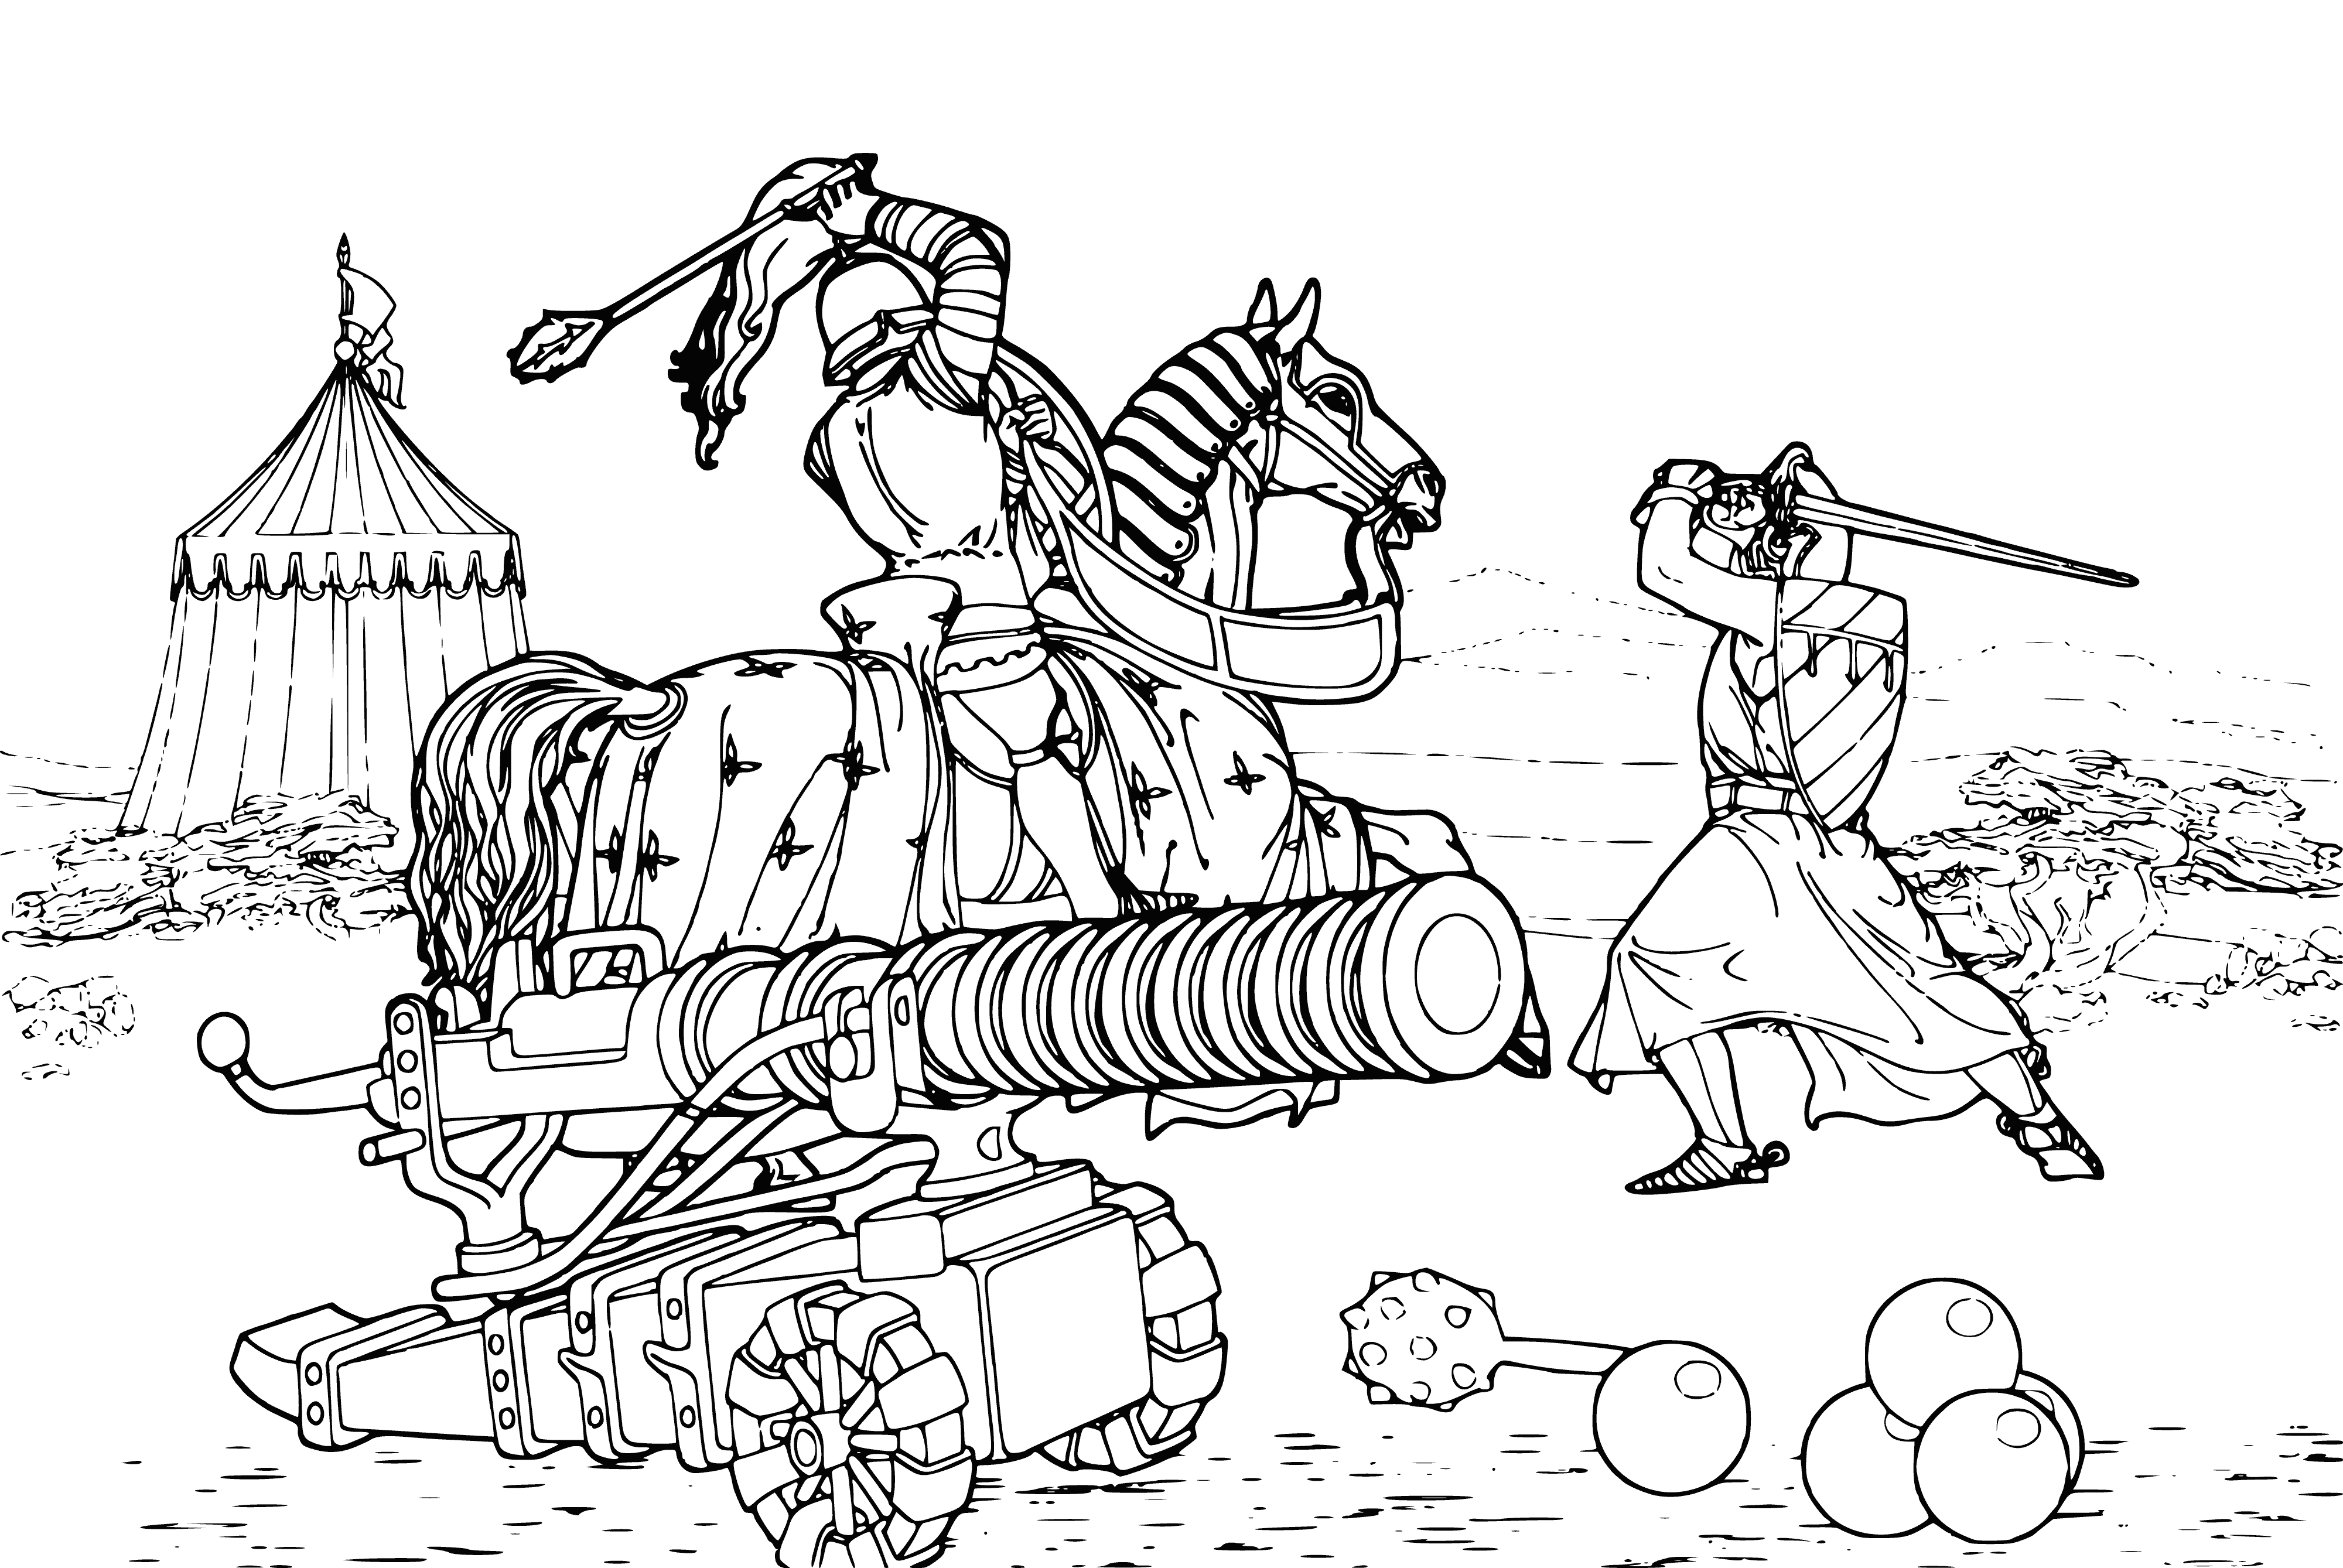 coloring page: Armored warriors prepare for battle in a coloring page full of swords, shields & axes. Some have full body armor, some just helmets & breastplates.